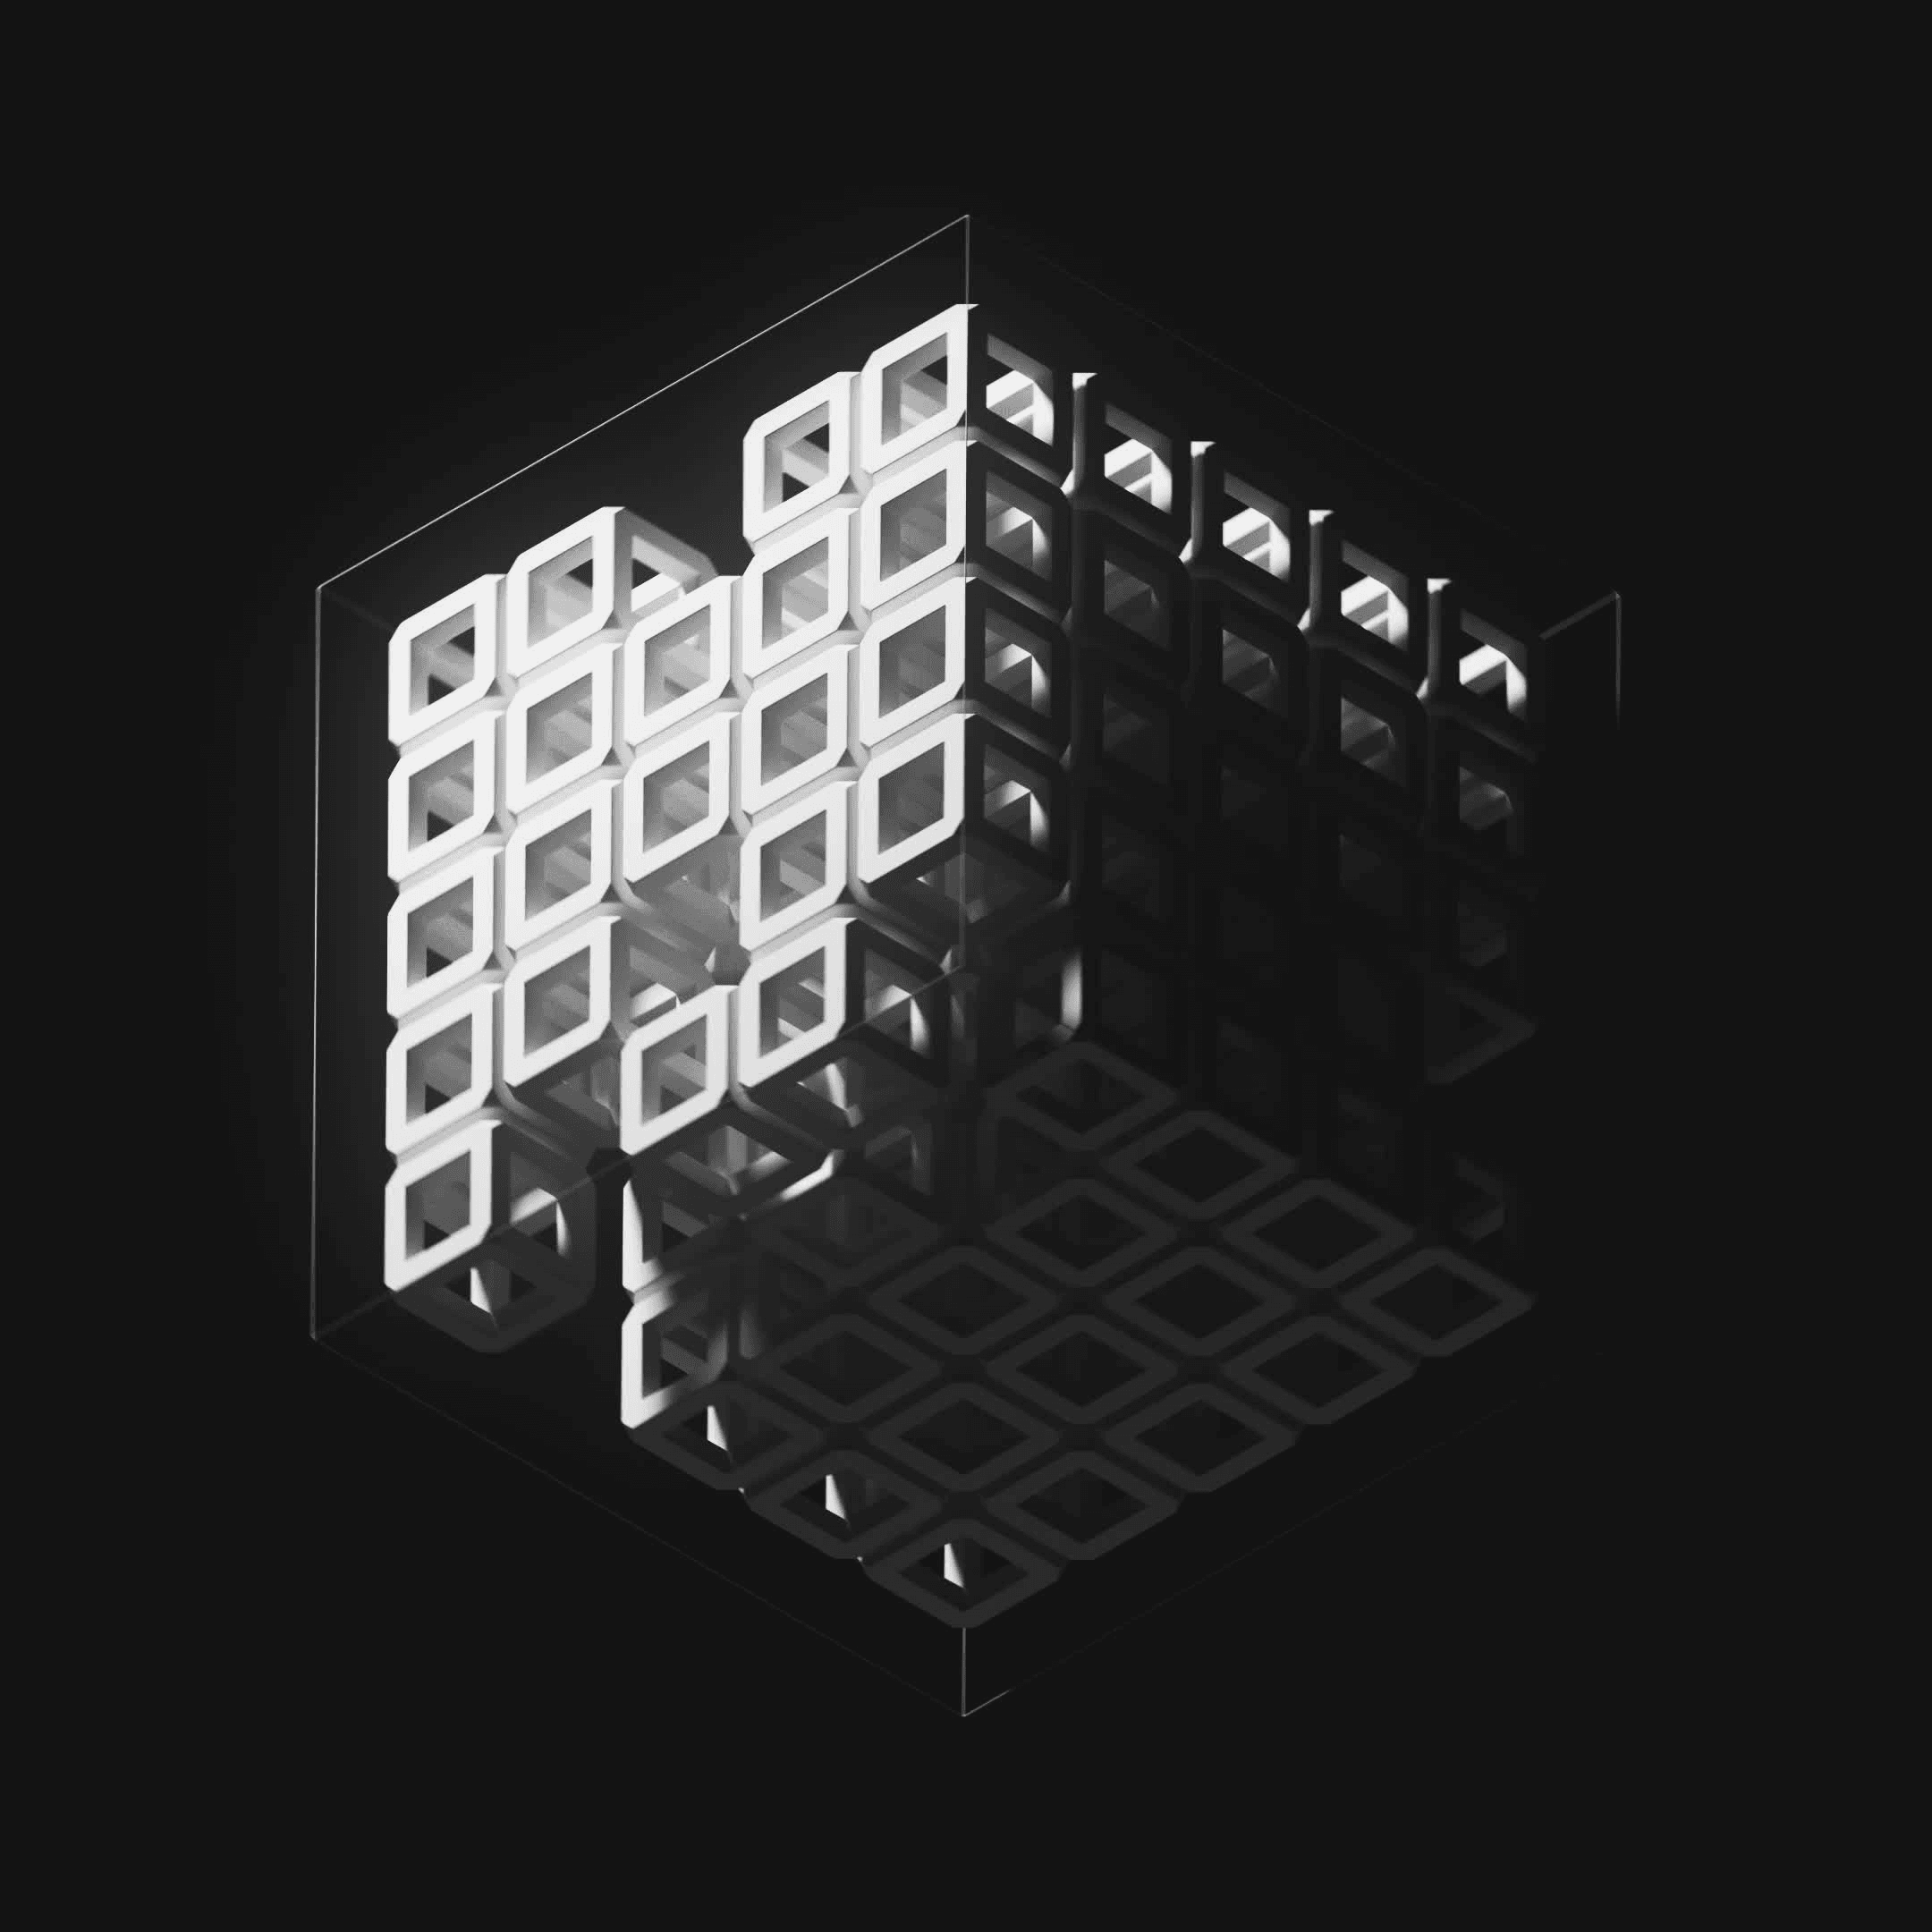 Hundred Cubes #16/34